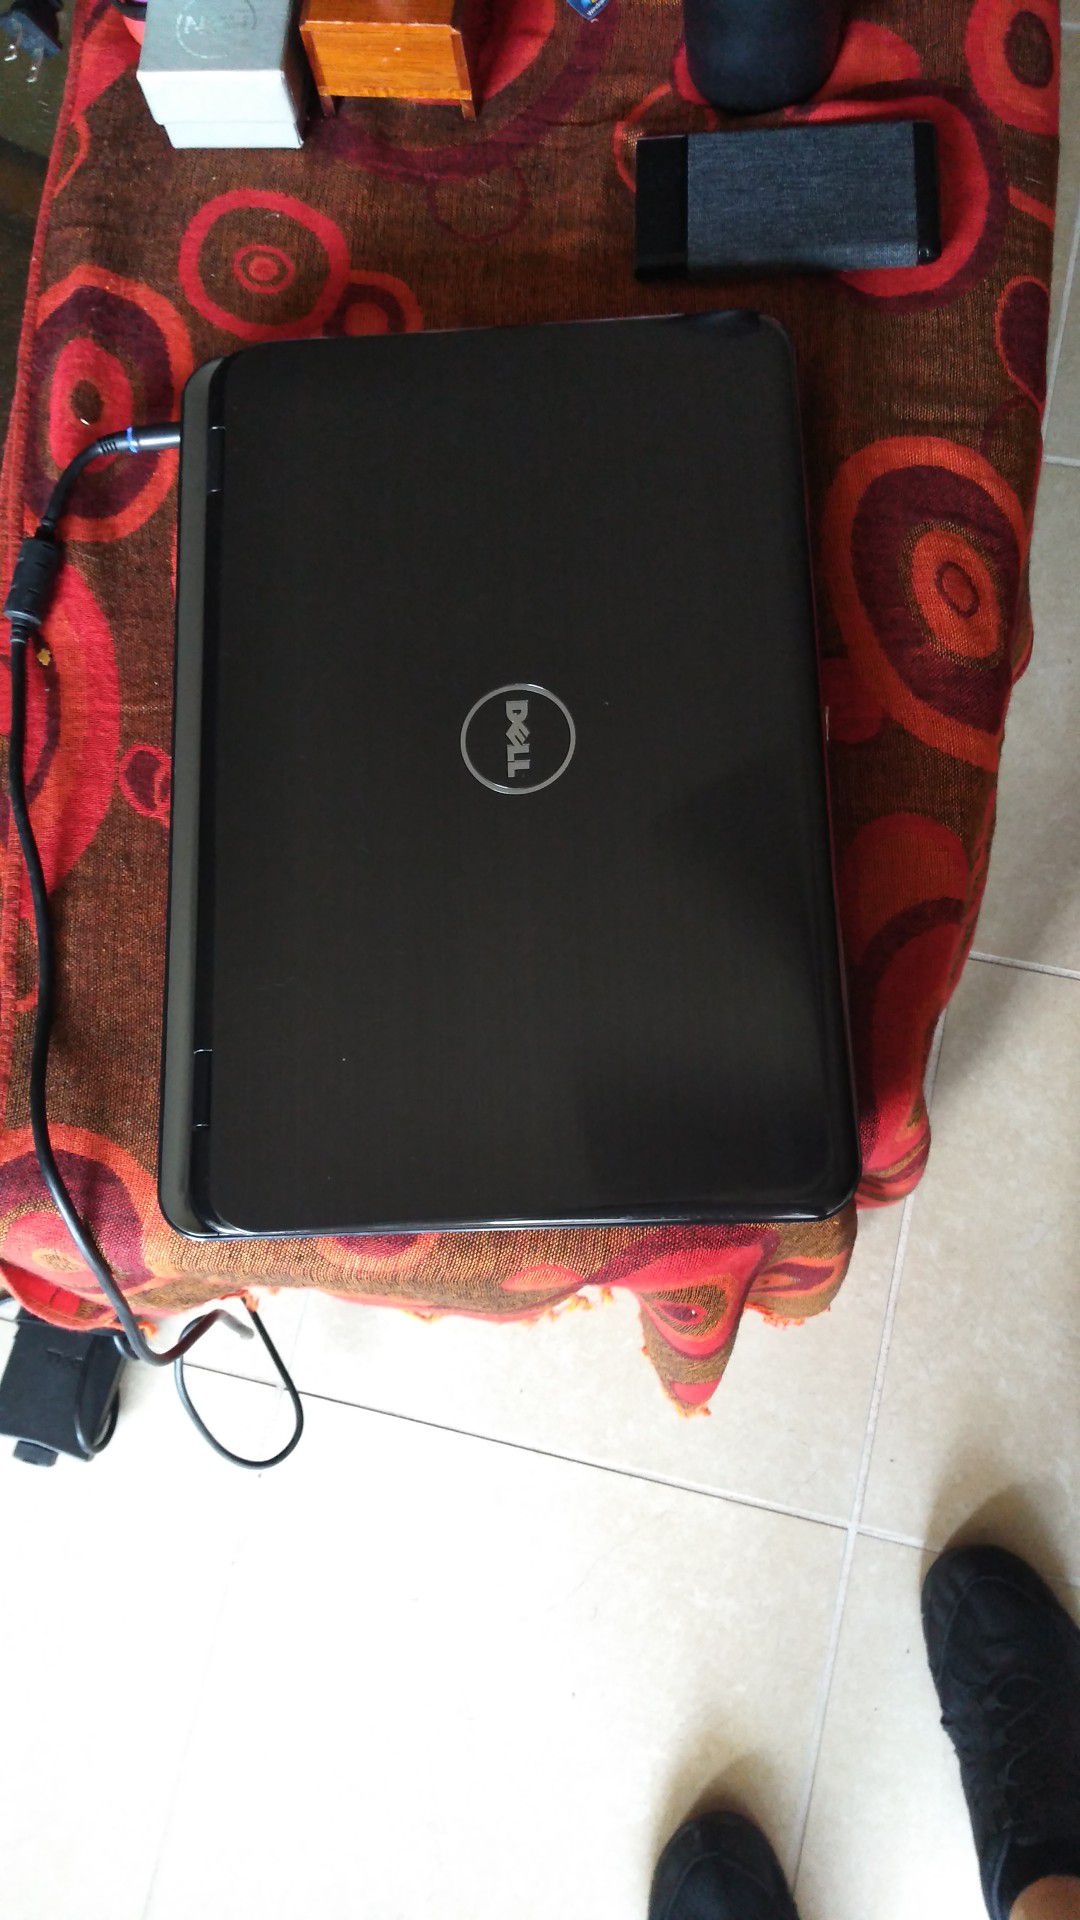 Dell Inspiron (N5010) Laptop, Win 7 (Cleaned and Factory Reset)